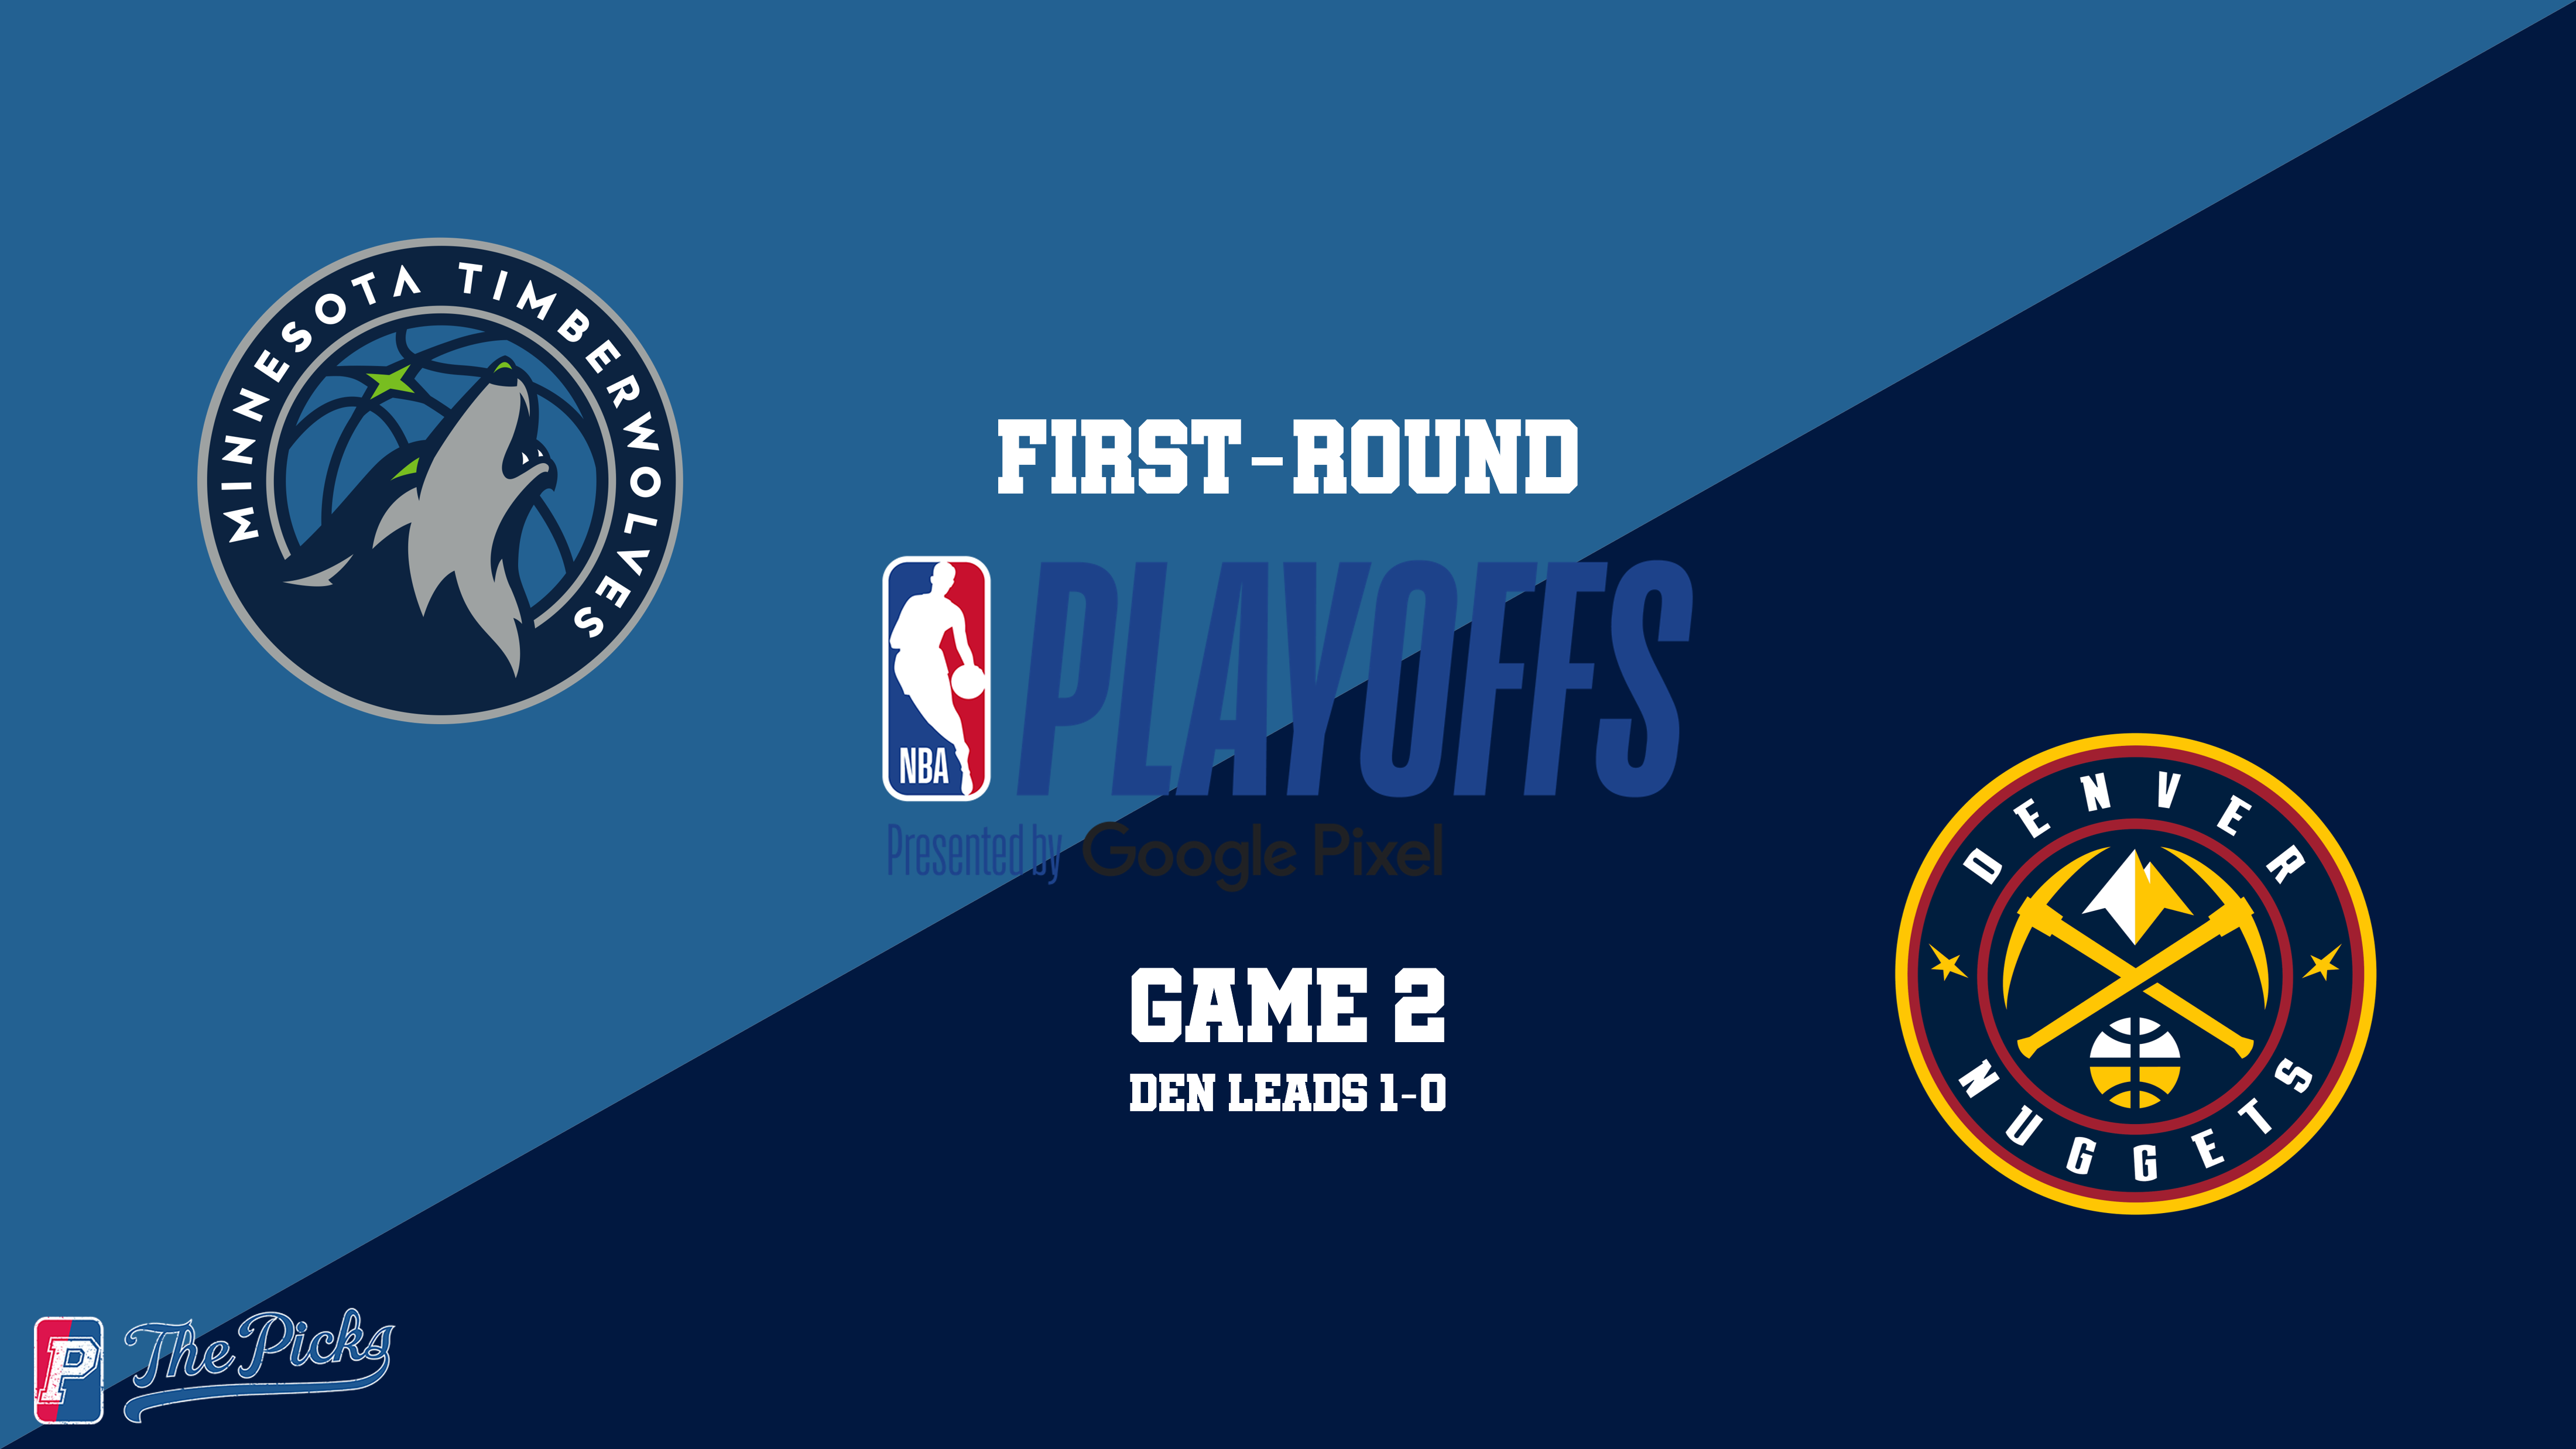 Nuggets facing Timberwolves in Game 2